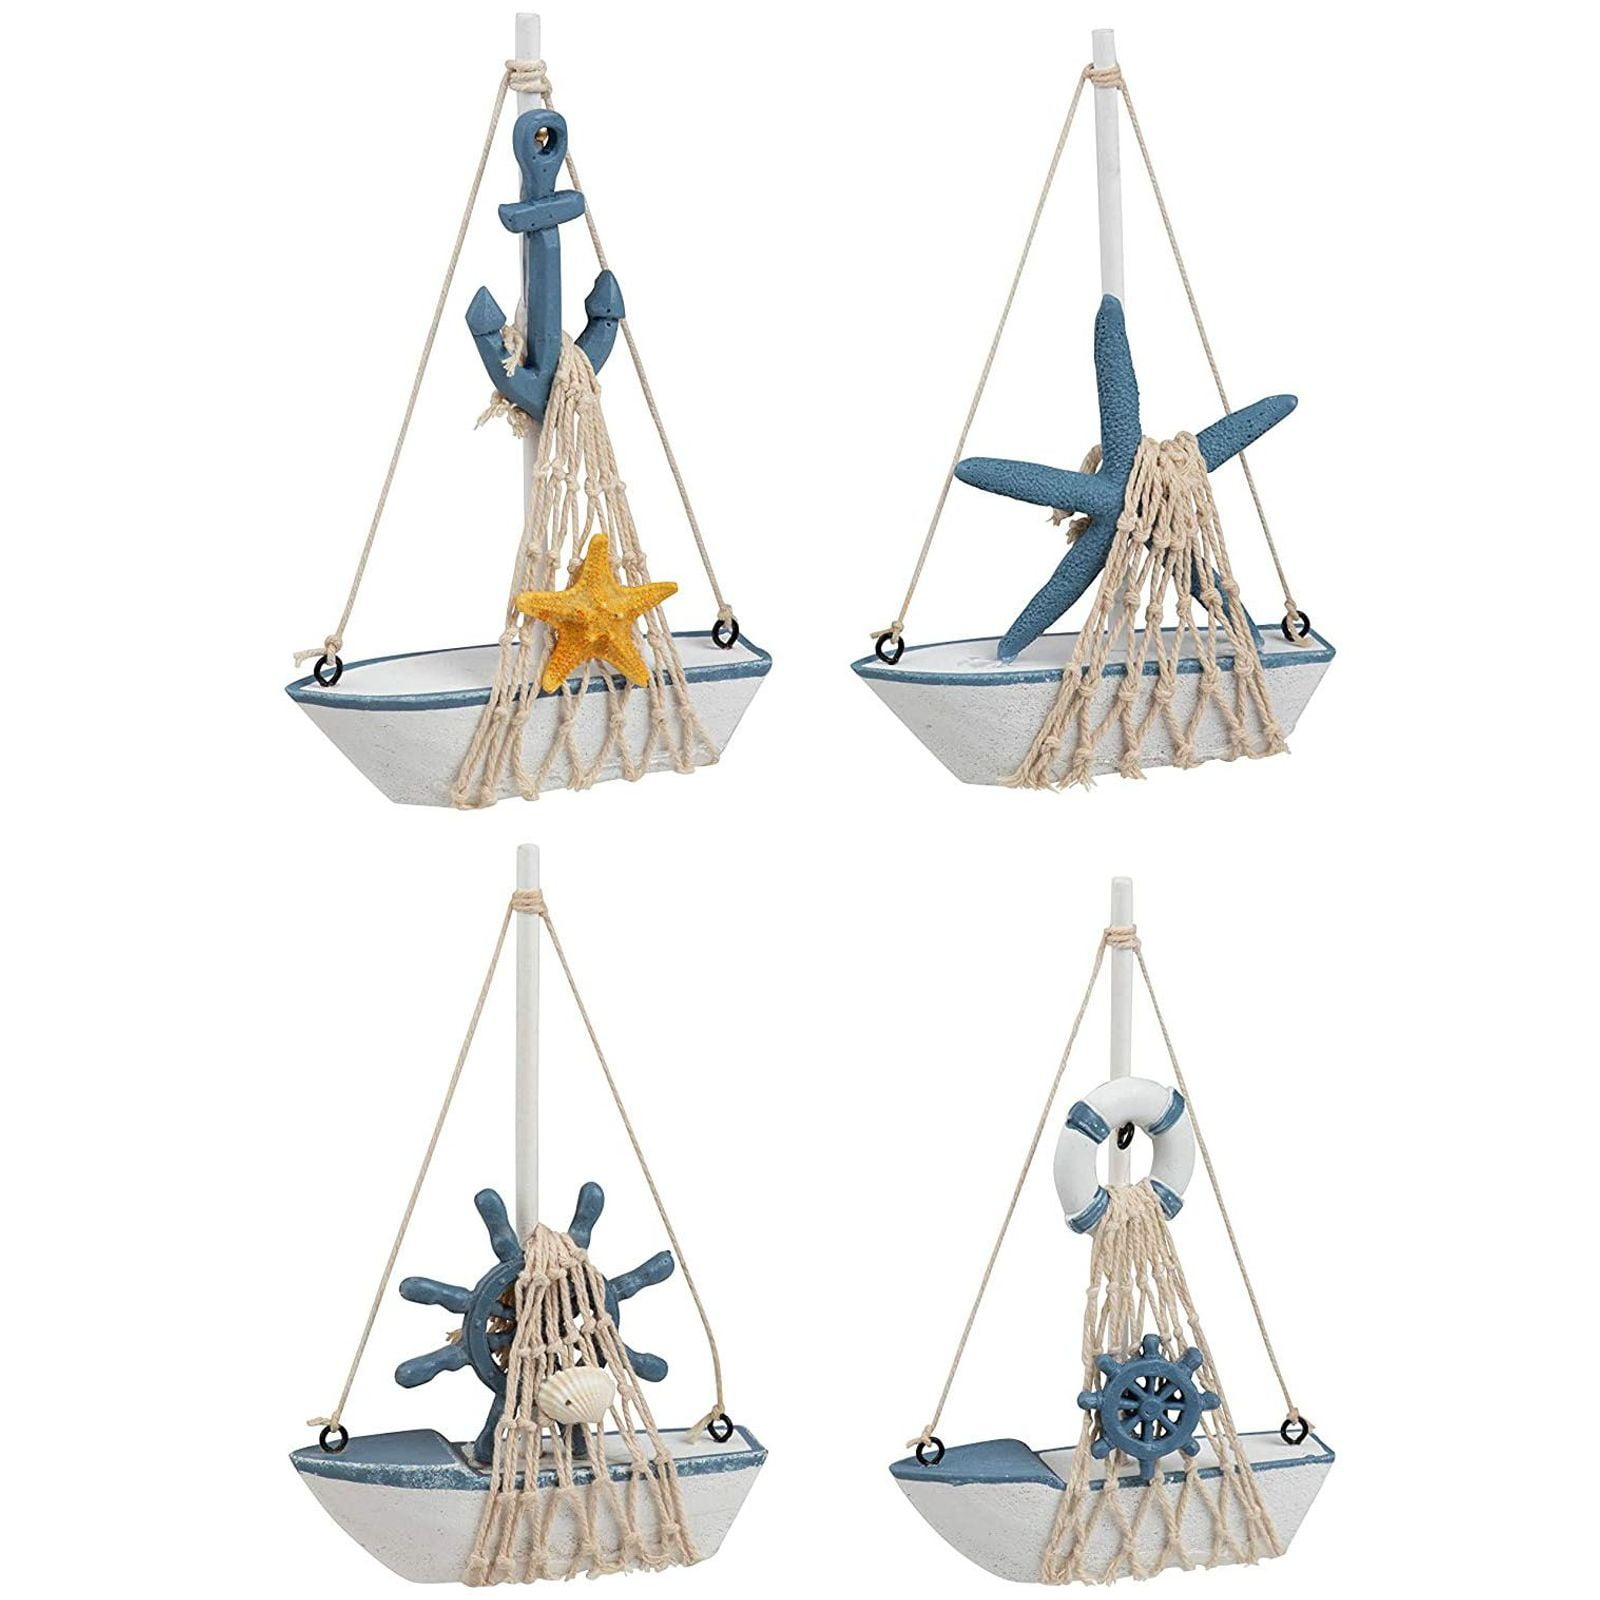 4x Ship 4.4" Tall Detailed Wooden Boat Model Nautical Home Decor Collectible F 